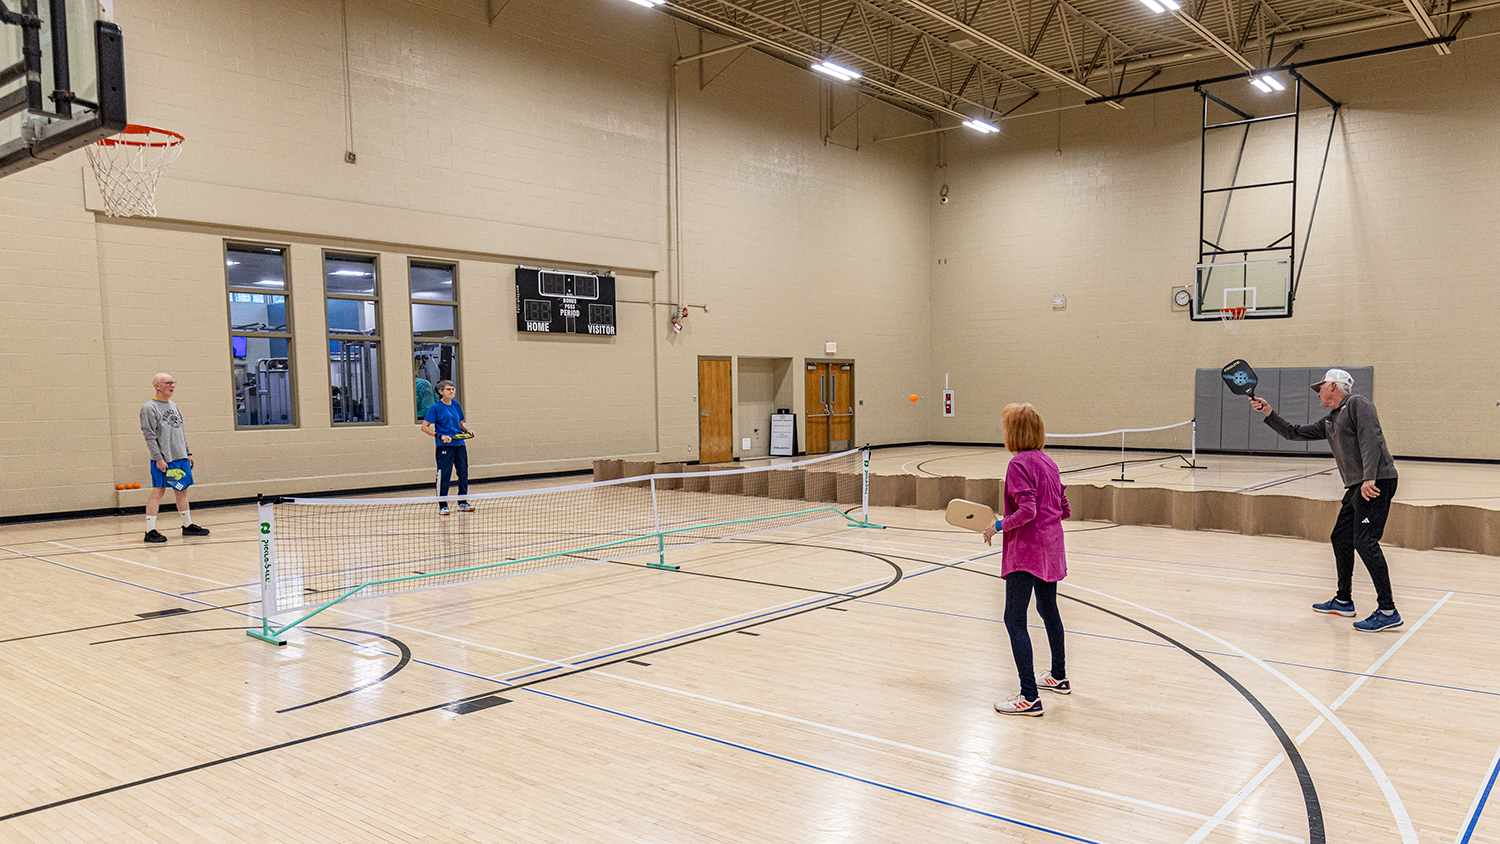 A foursome playing pickleball at the Tomahawk Ridge Community Center gym.